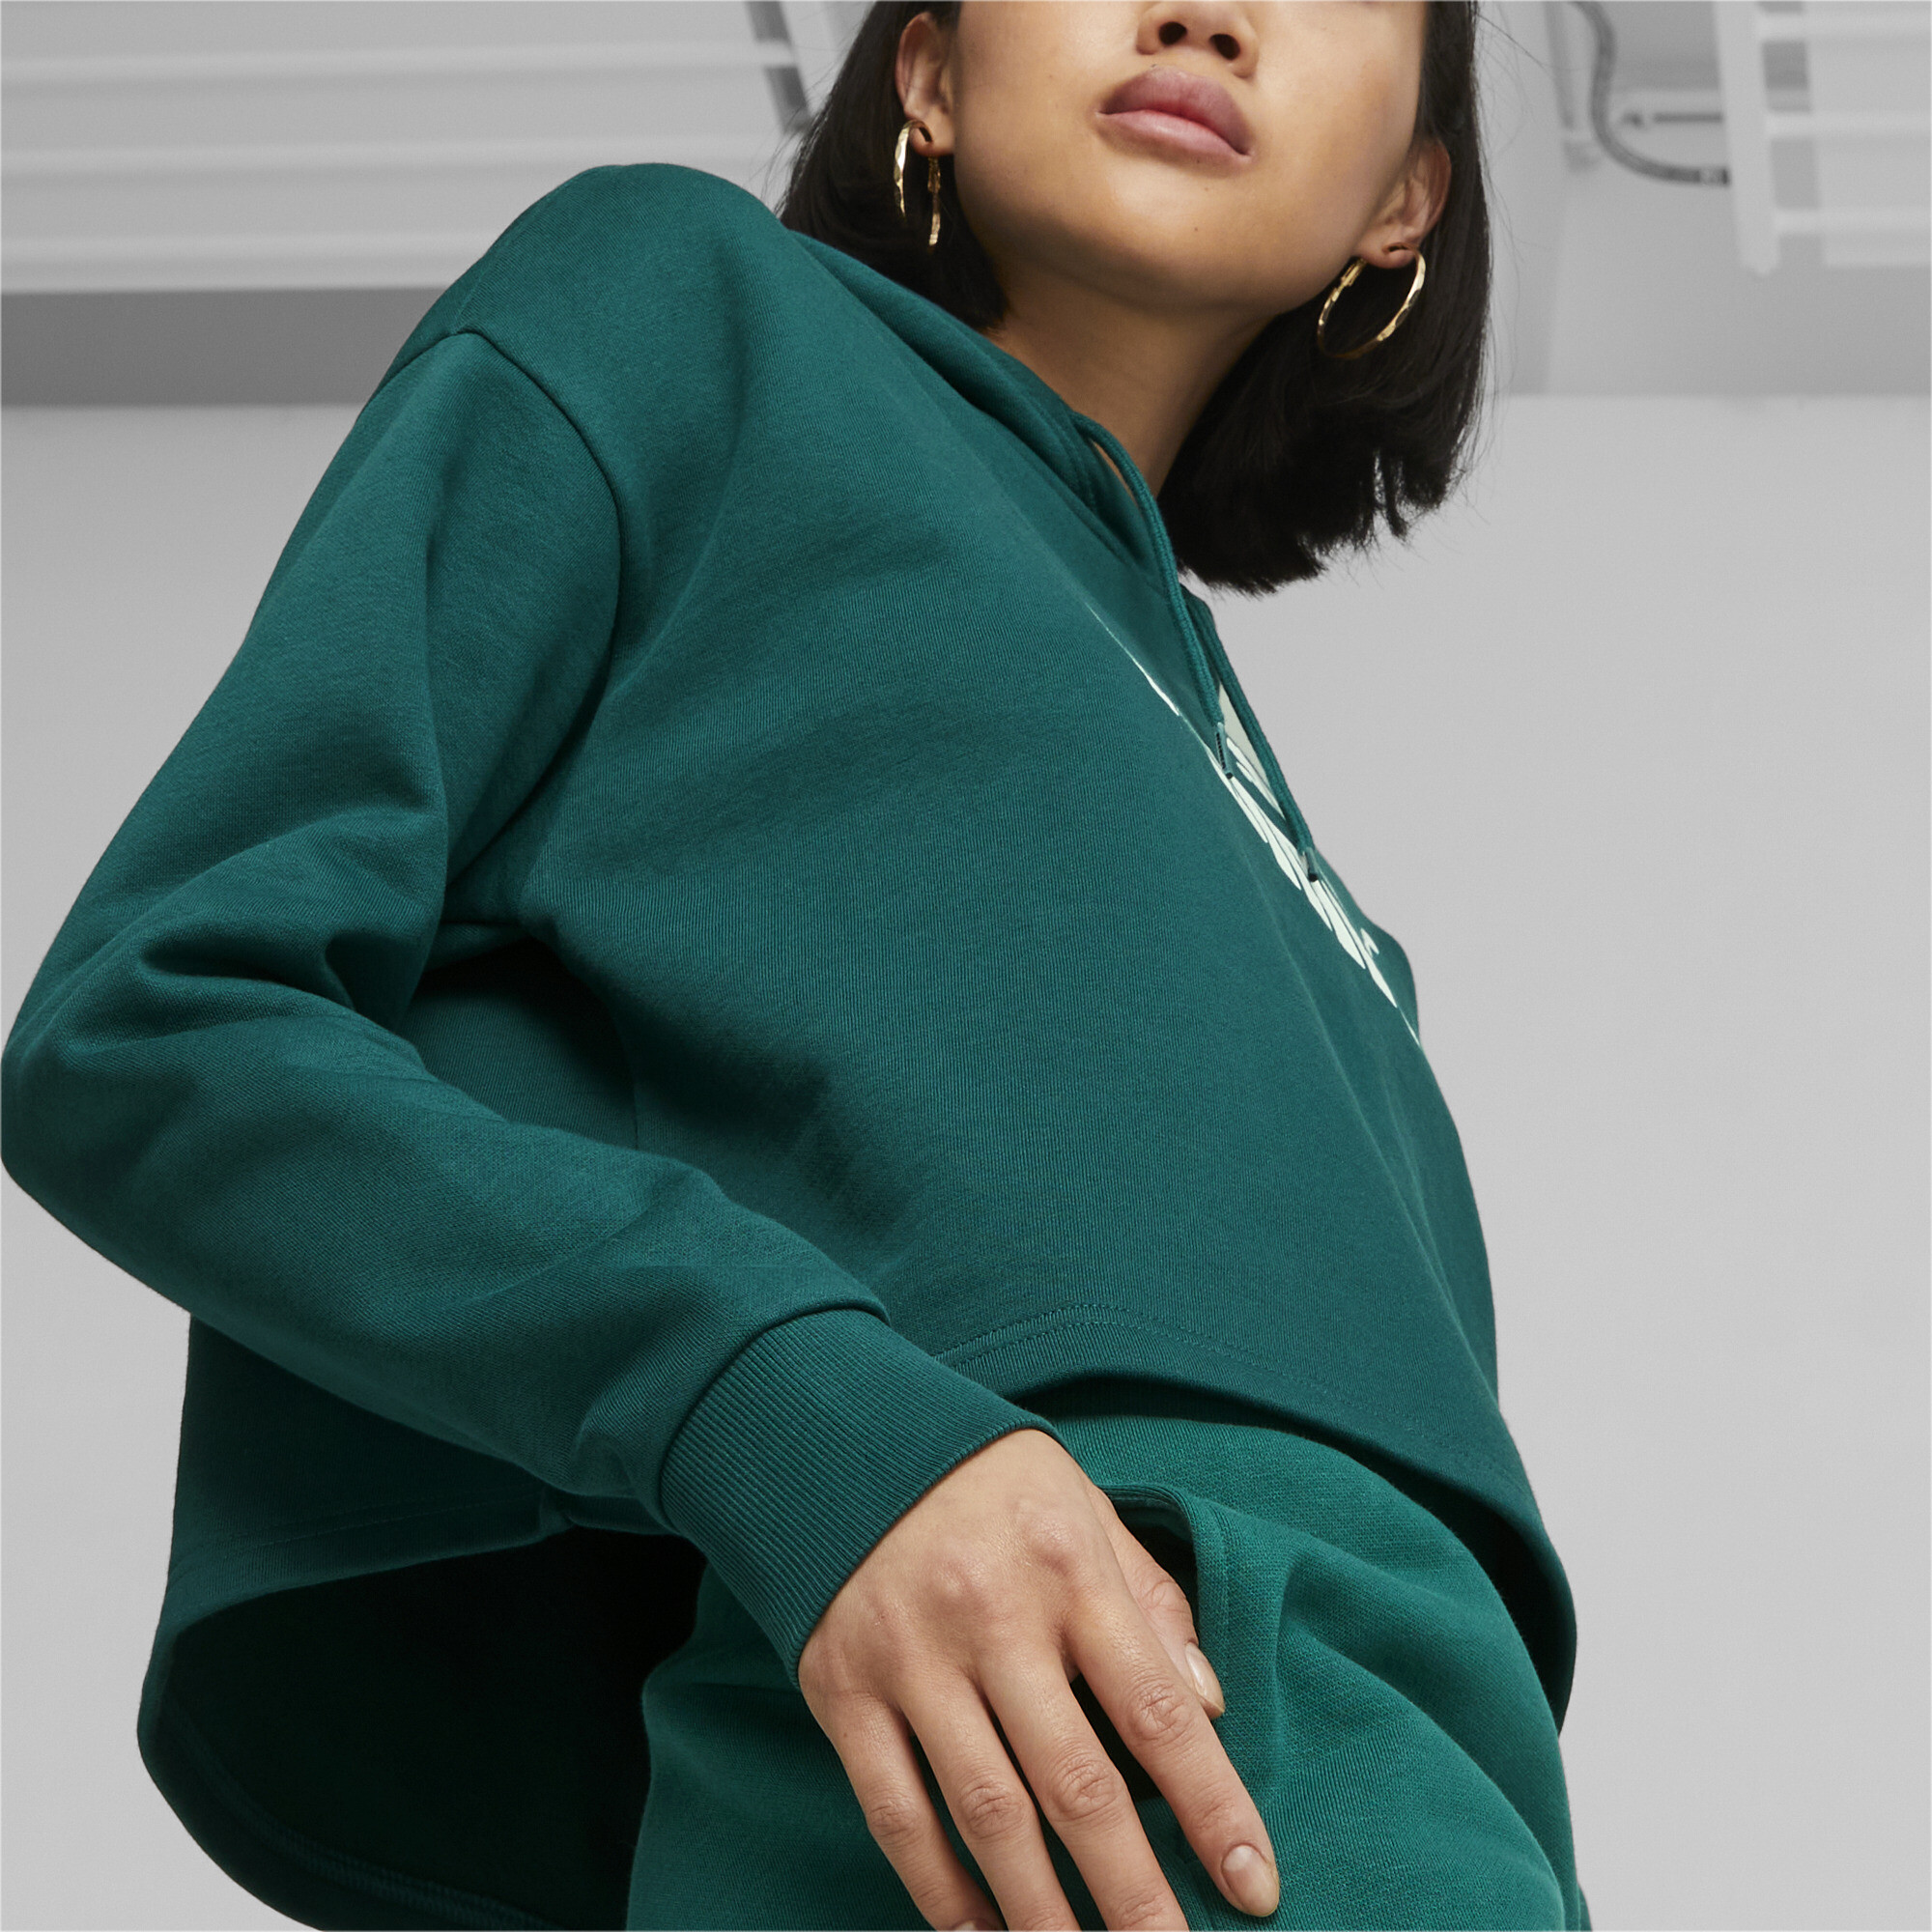 Women's Puma Essentials Cropped Logo's Hoodie, Green, Size S, Clothing